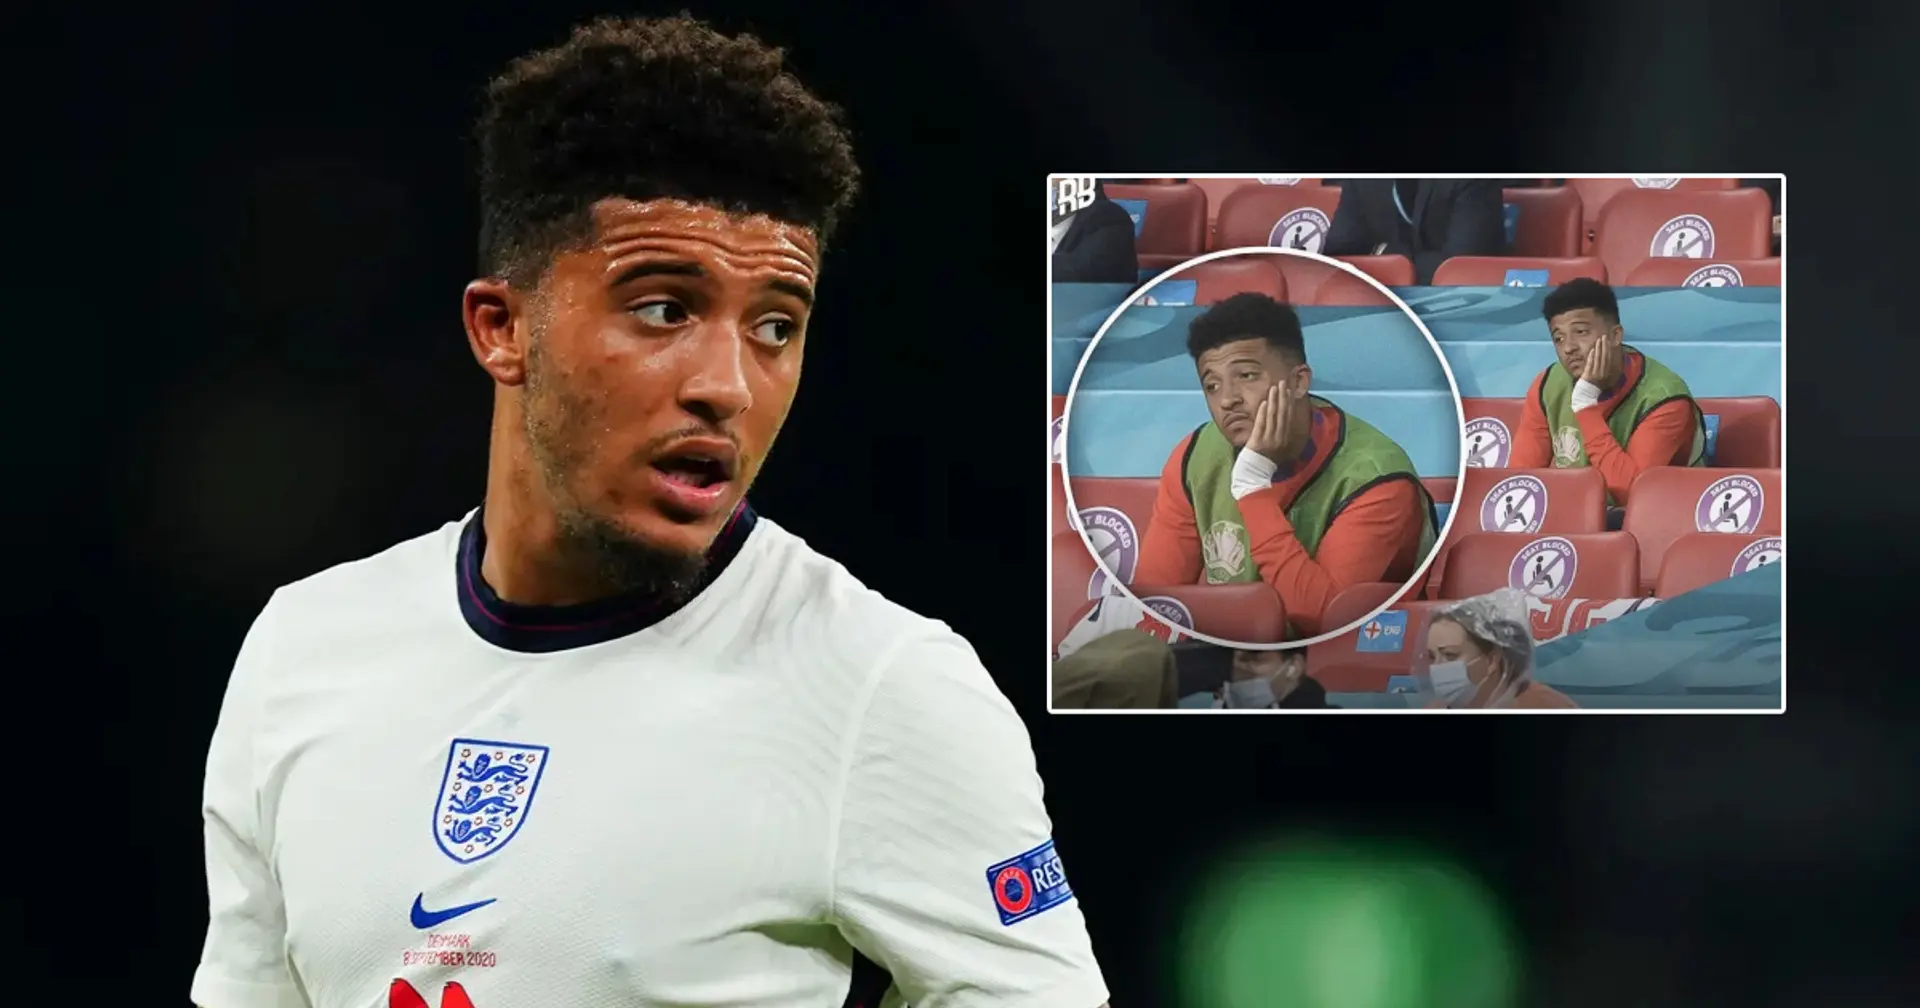 If Jadon Sancho is so good and worth £77m, why doesn't he play for England? You asked, we answered